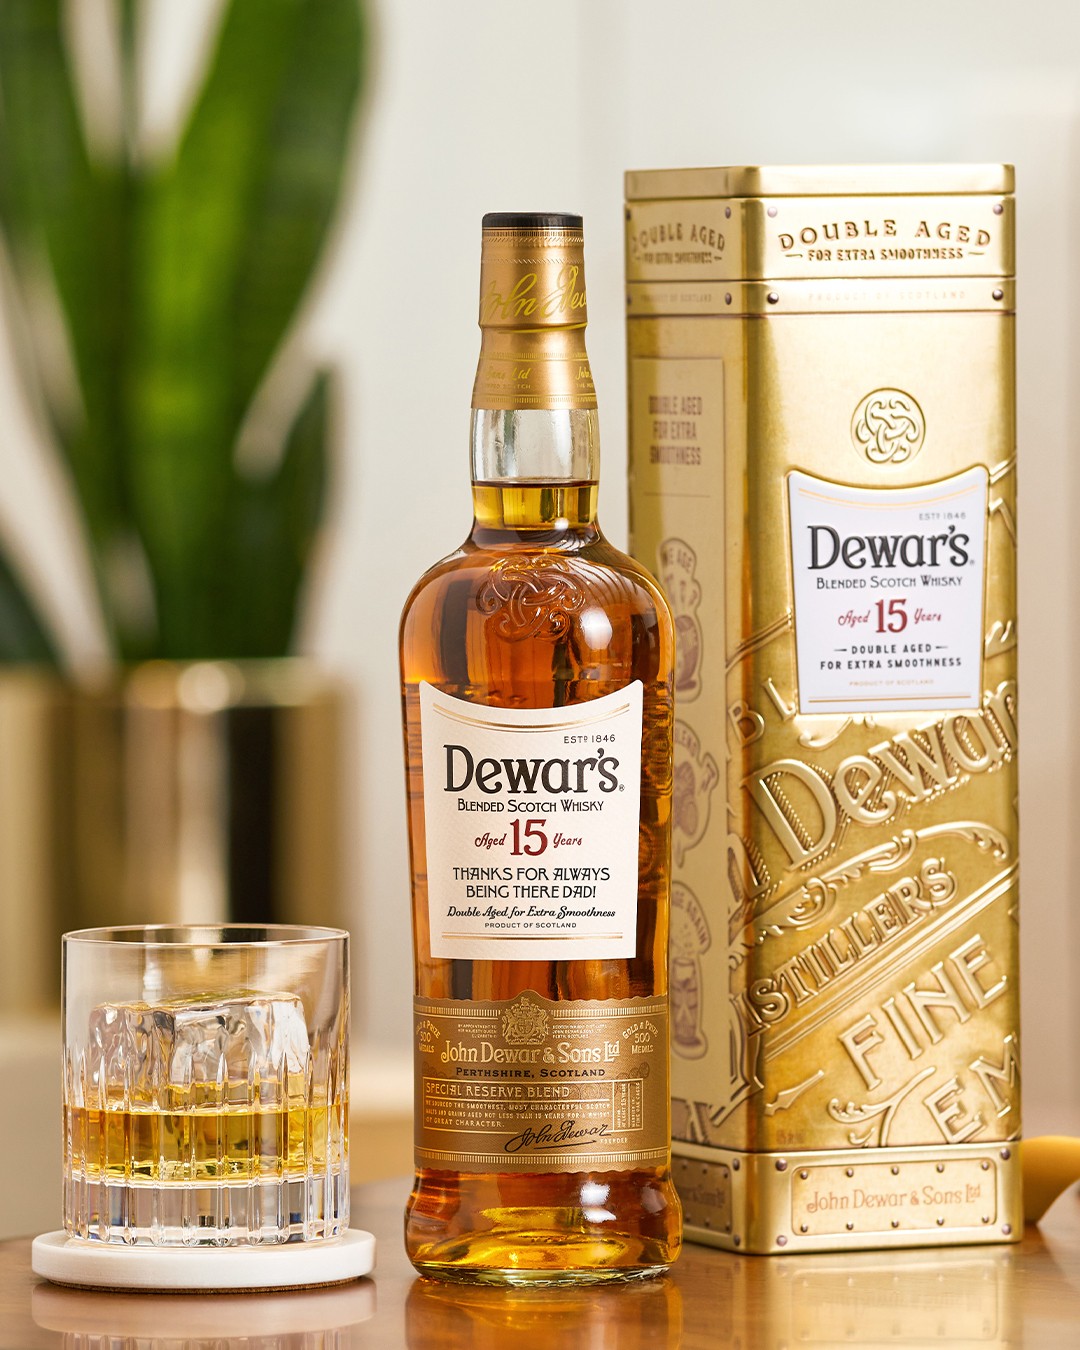 Ace Father’s Day with a personalized label on Dewar’s 12, 15, or 18 Year Old Scotch Whisky. Head over to dewars.com to create your free label or have a personalized bottle delivered right to your door. #WhiskyCastSponsor #dewars #scotch